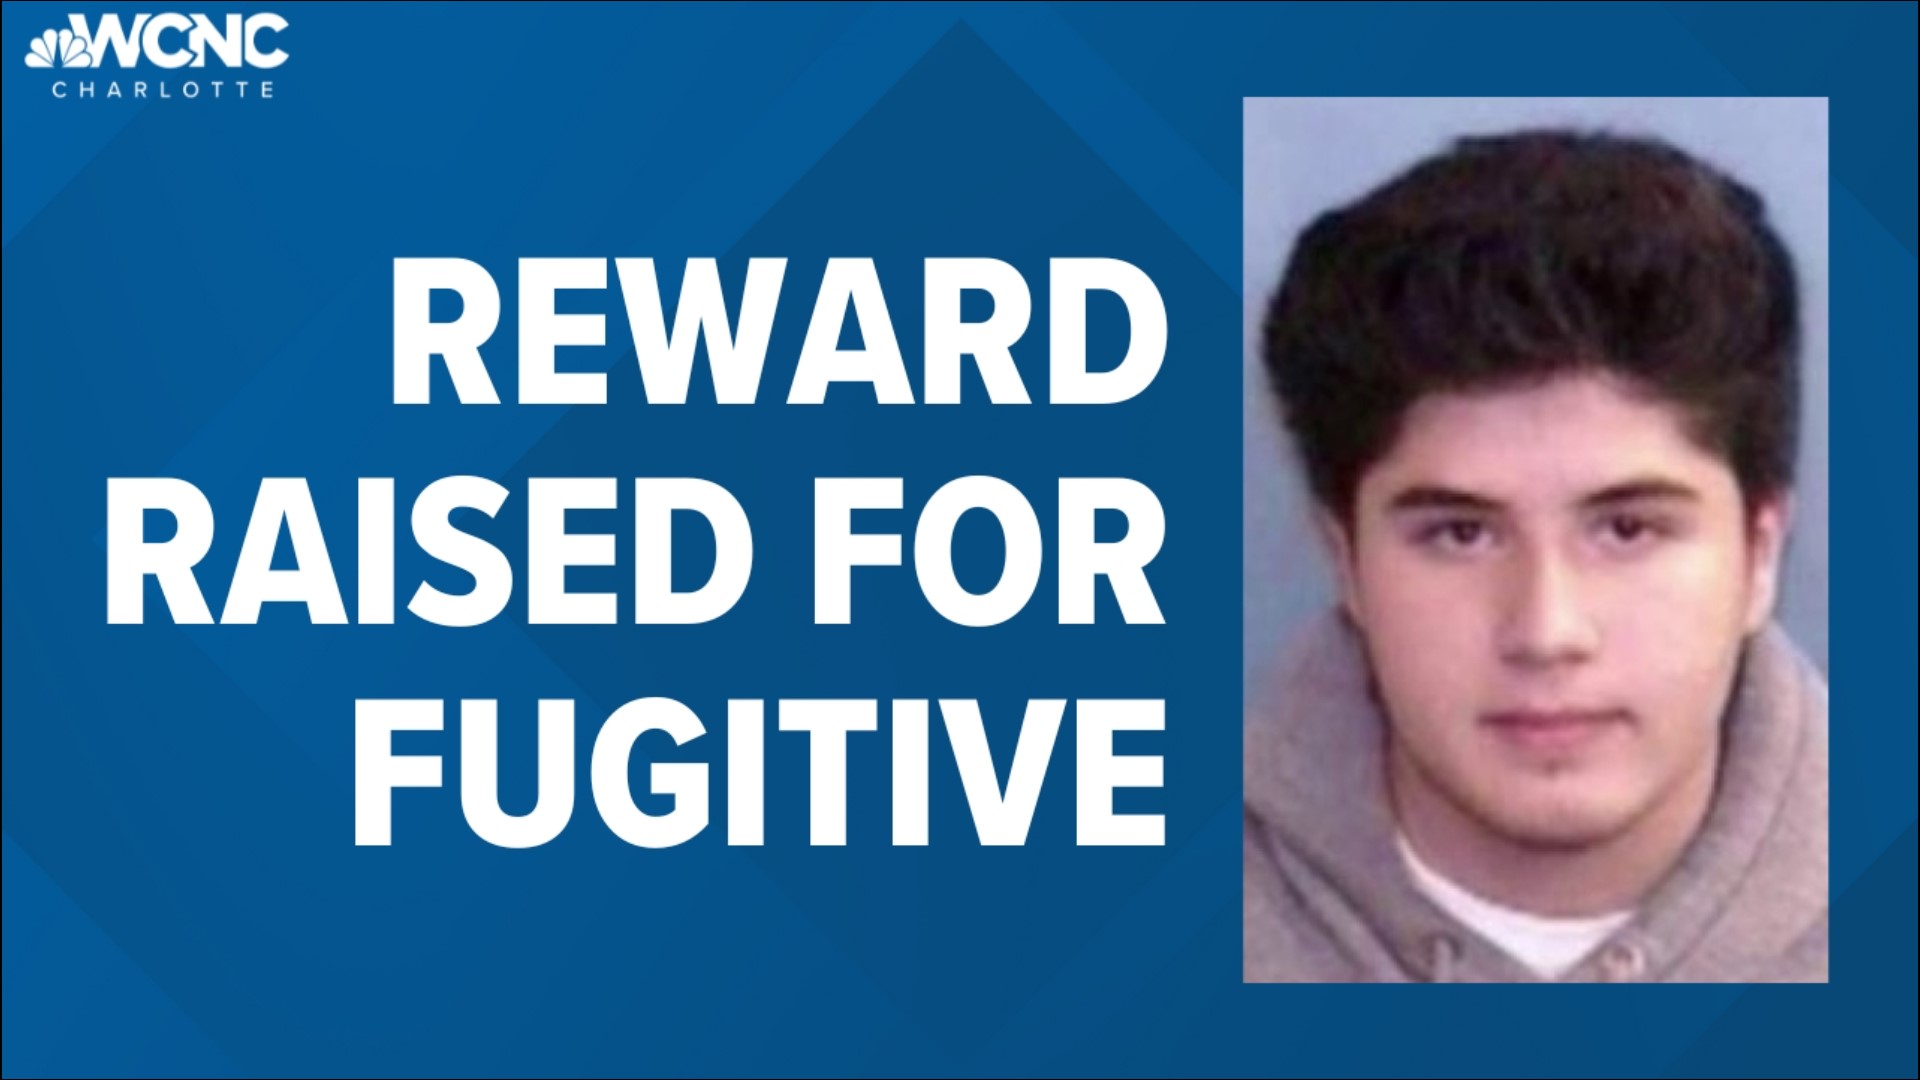 The FBI is adding more incentives for the public to provide information that could lead to an arrest of the bureau's 10 most wanted fugitives.